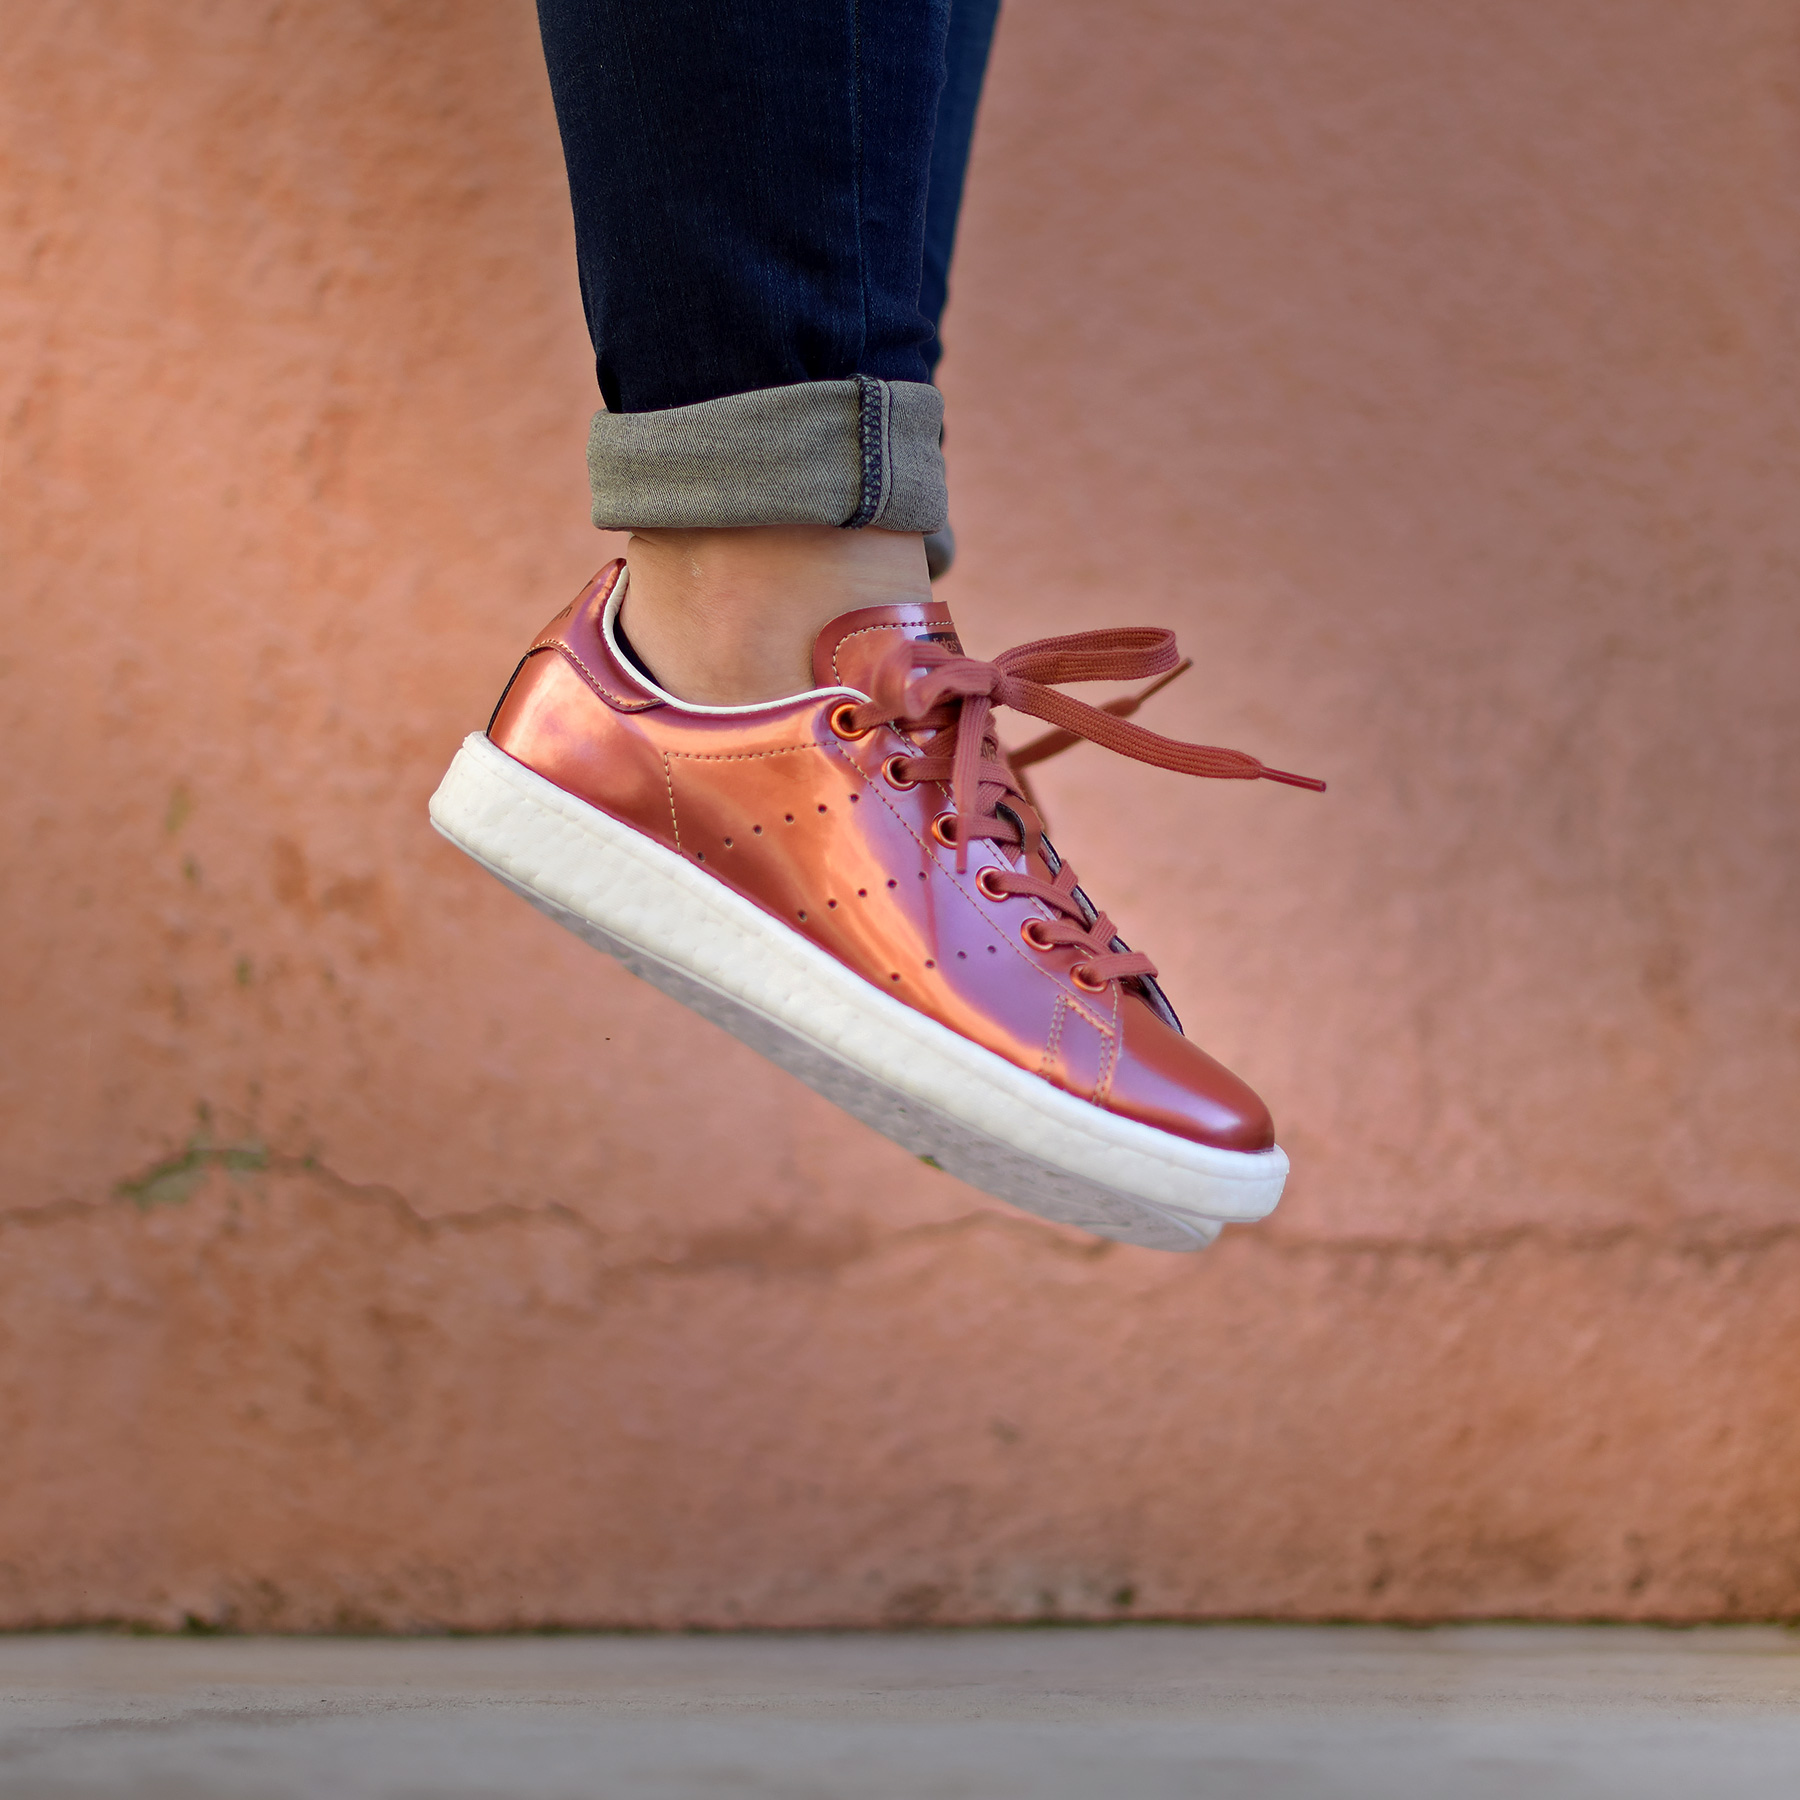 adidas Stan Smith Boost Copper - Sneakers.fr